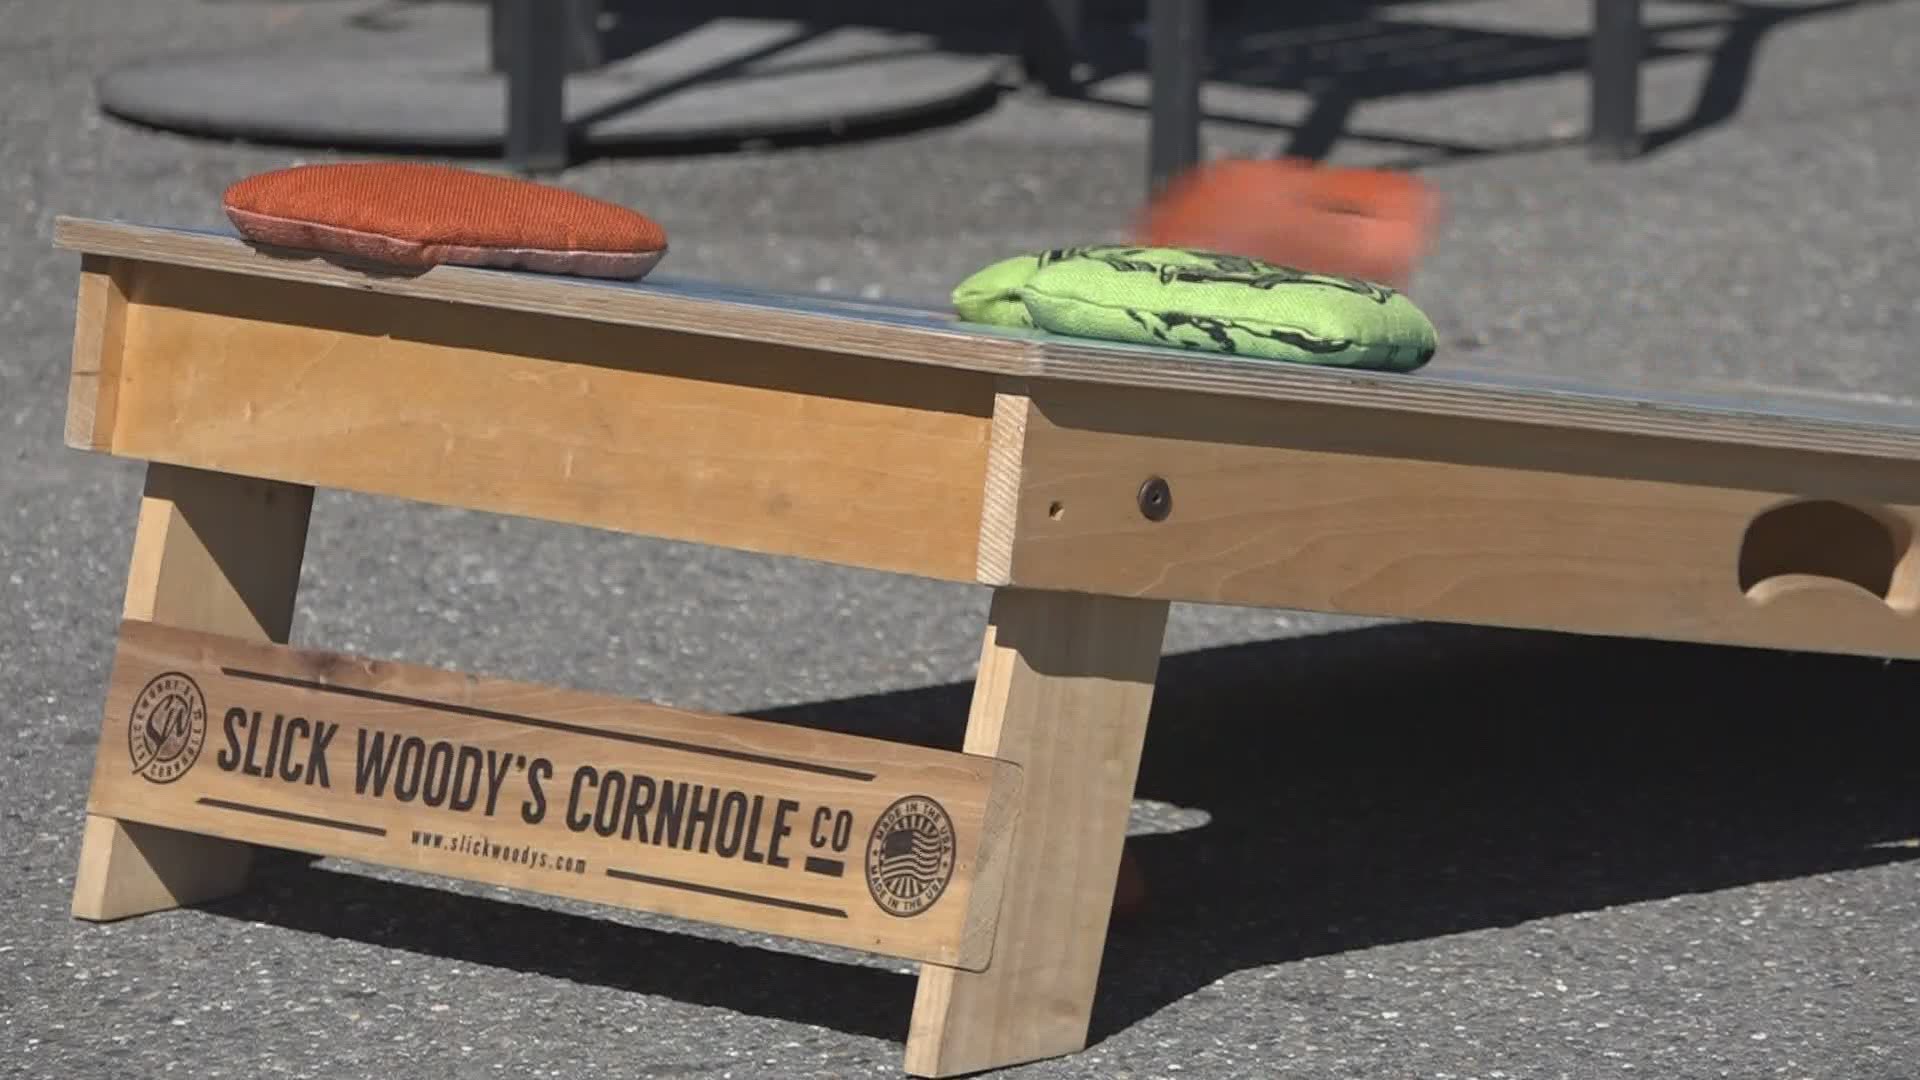 Dozens of cornhole players gathered in Bangor for a two-day cornhole tournament.